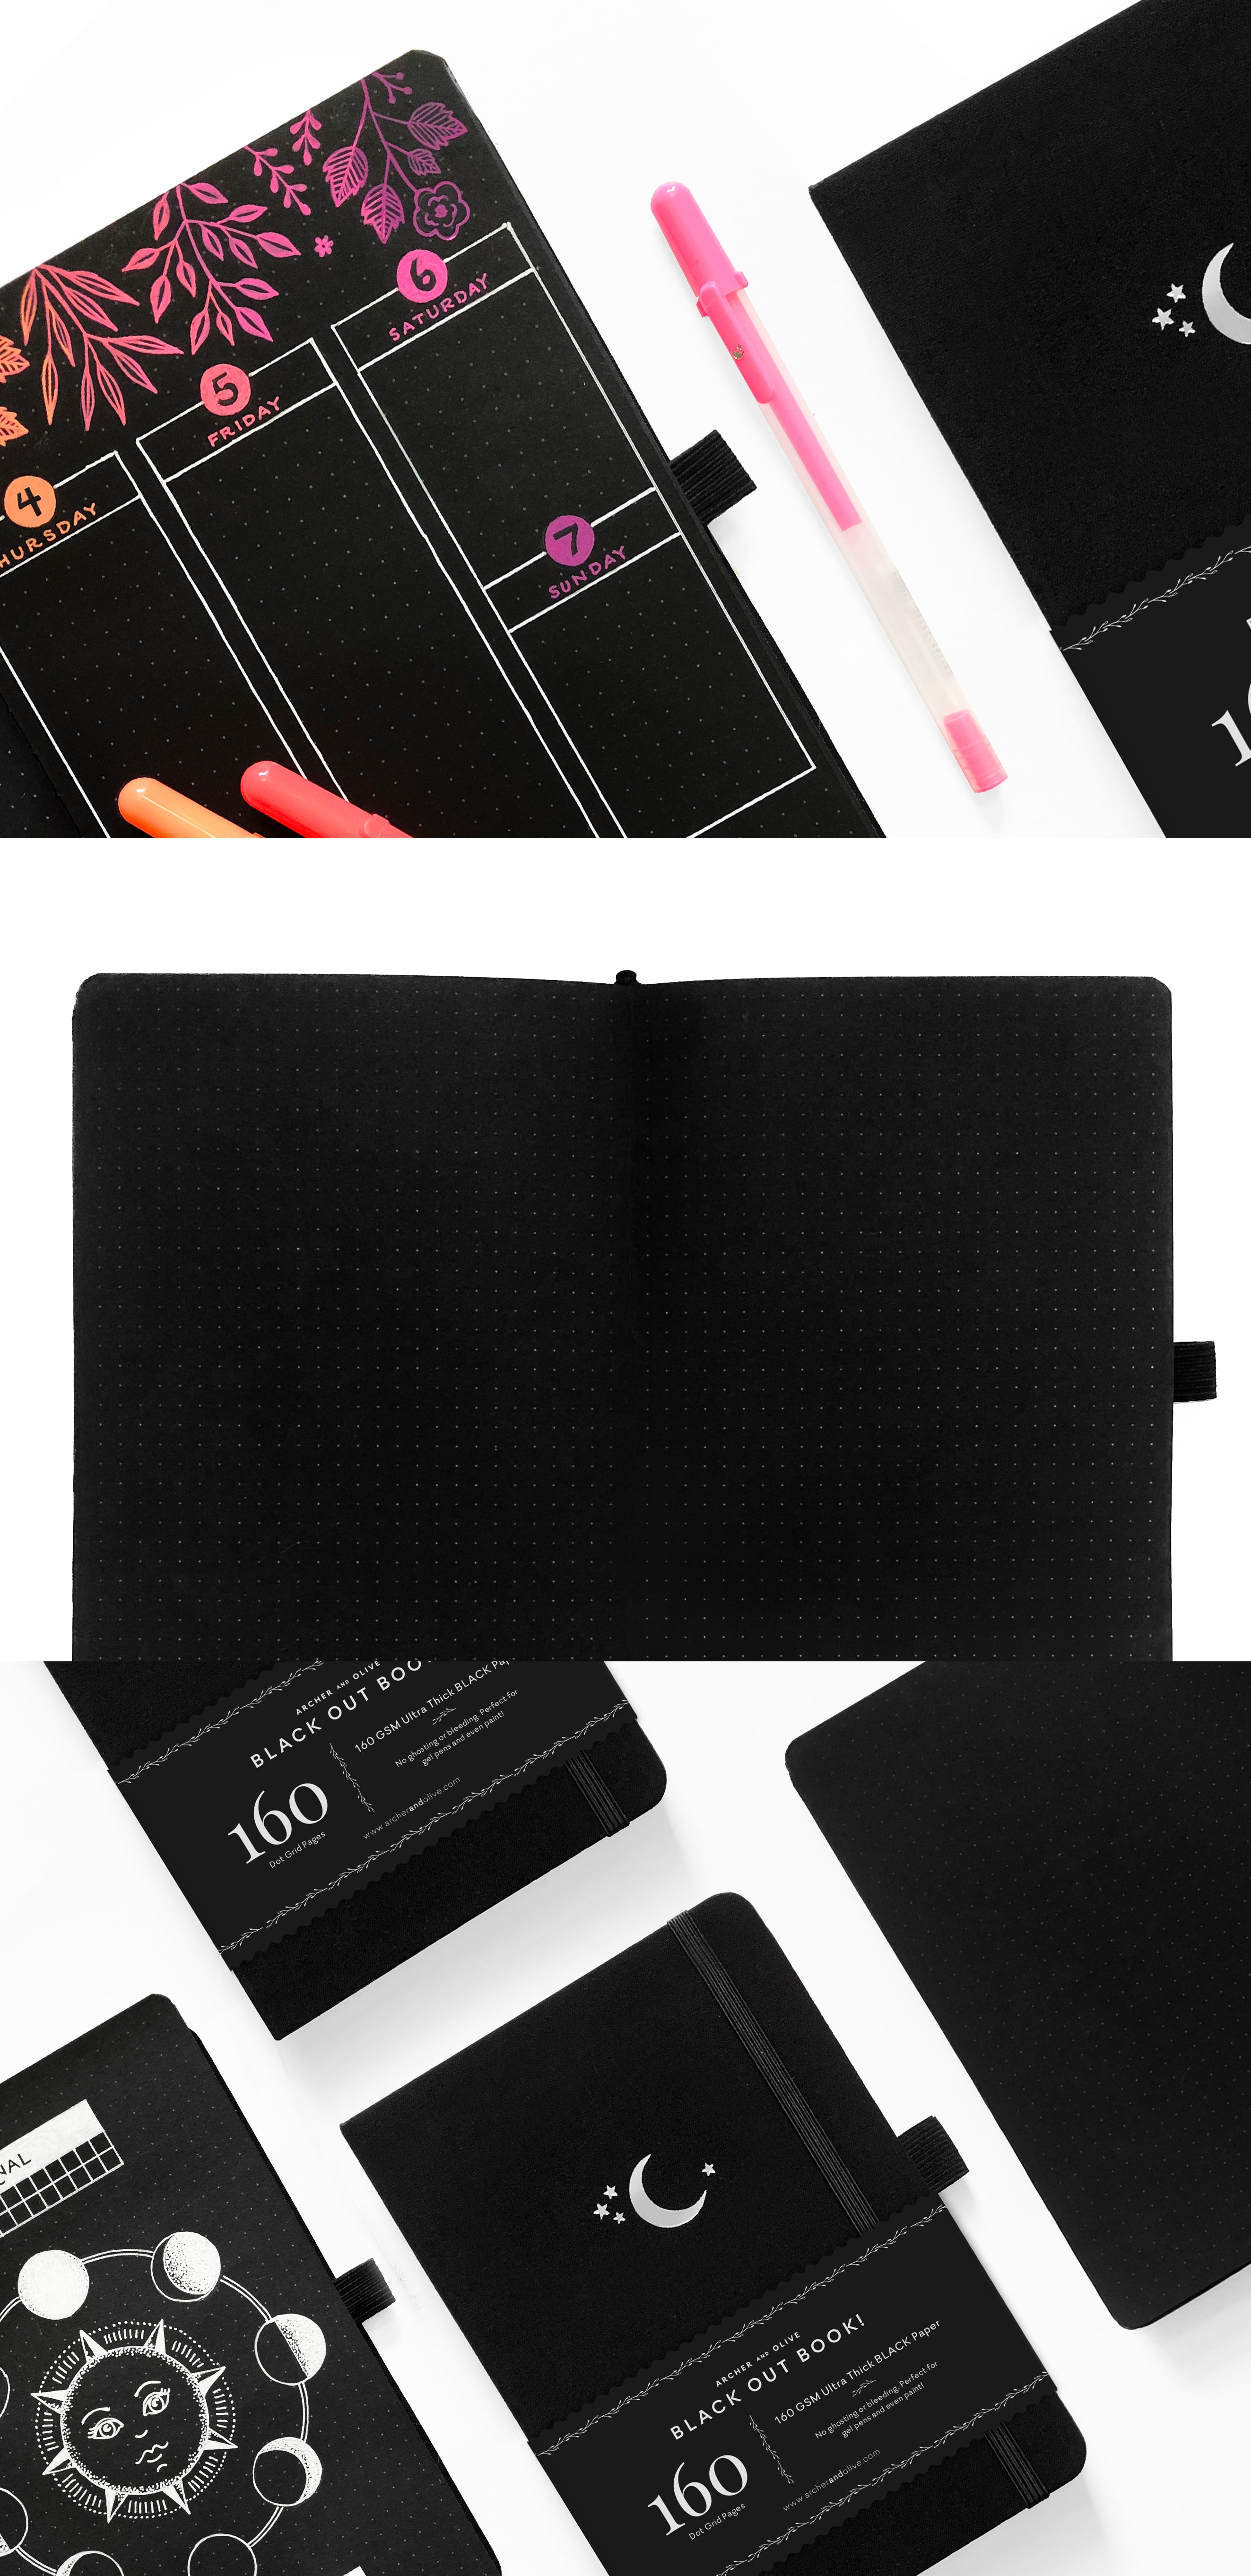 Introducing the BLACKOUT! Book - Black Page Dot Grid Journal